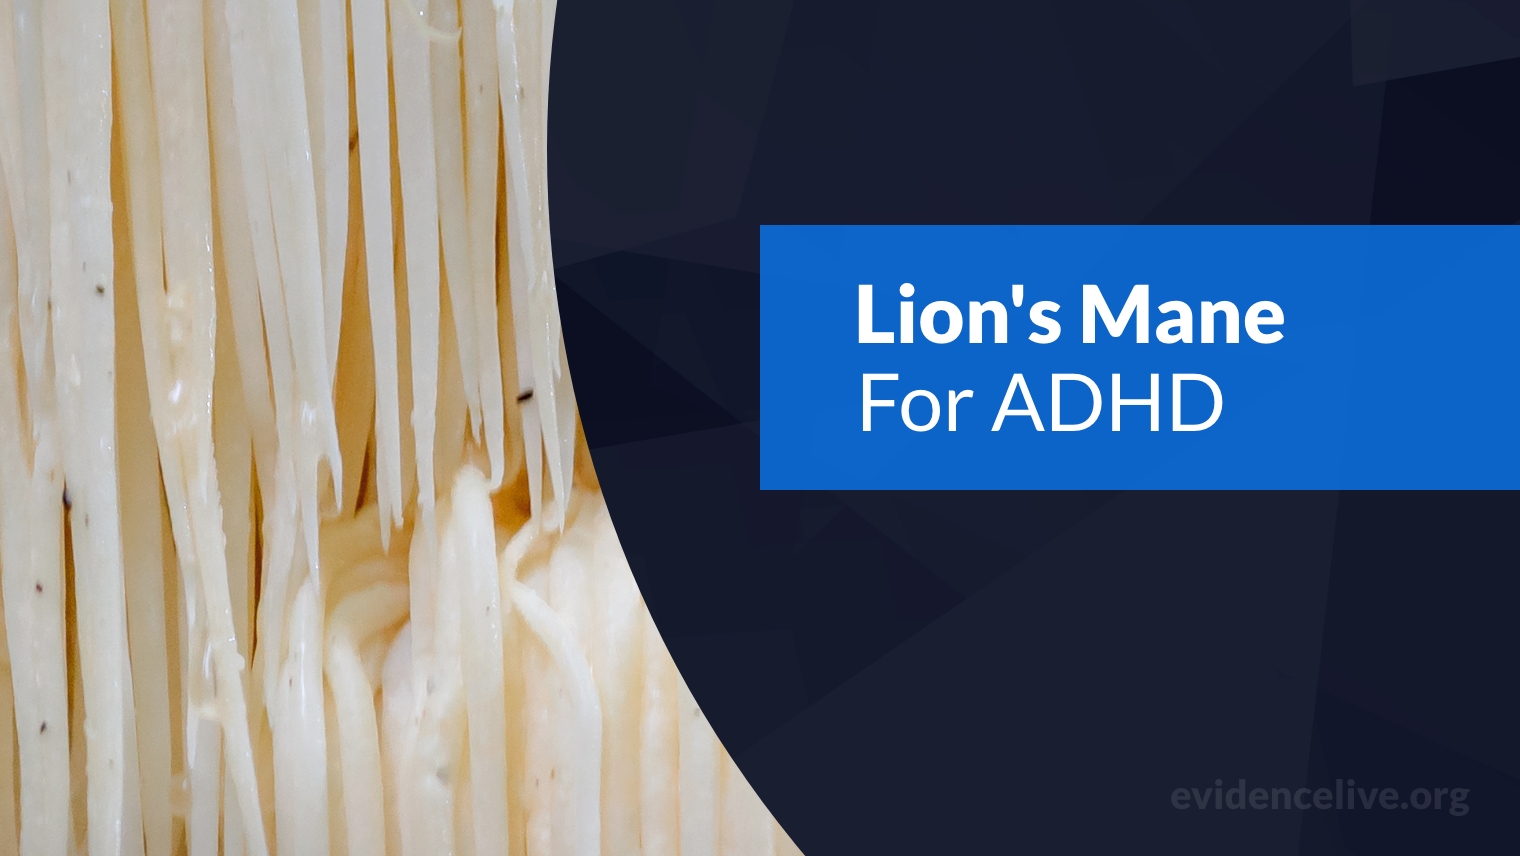 Can You Take Lion’s Mane For ADHD?